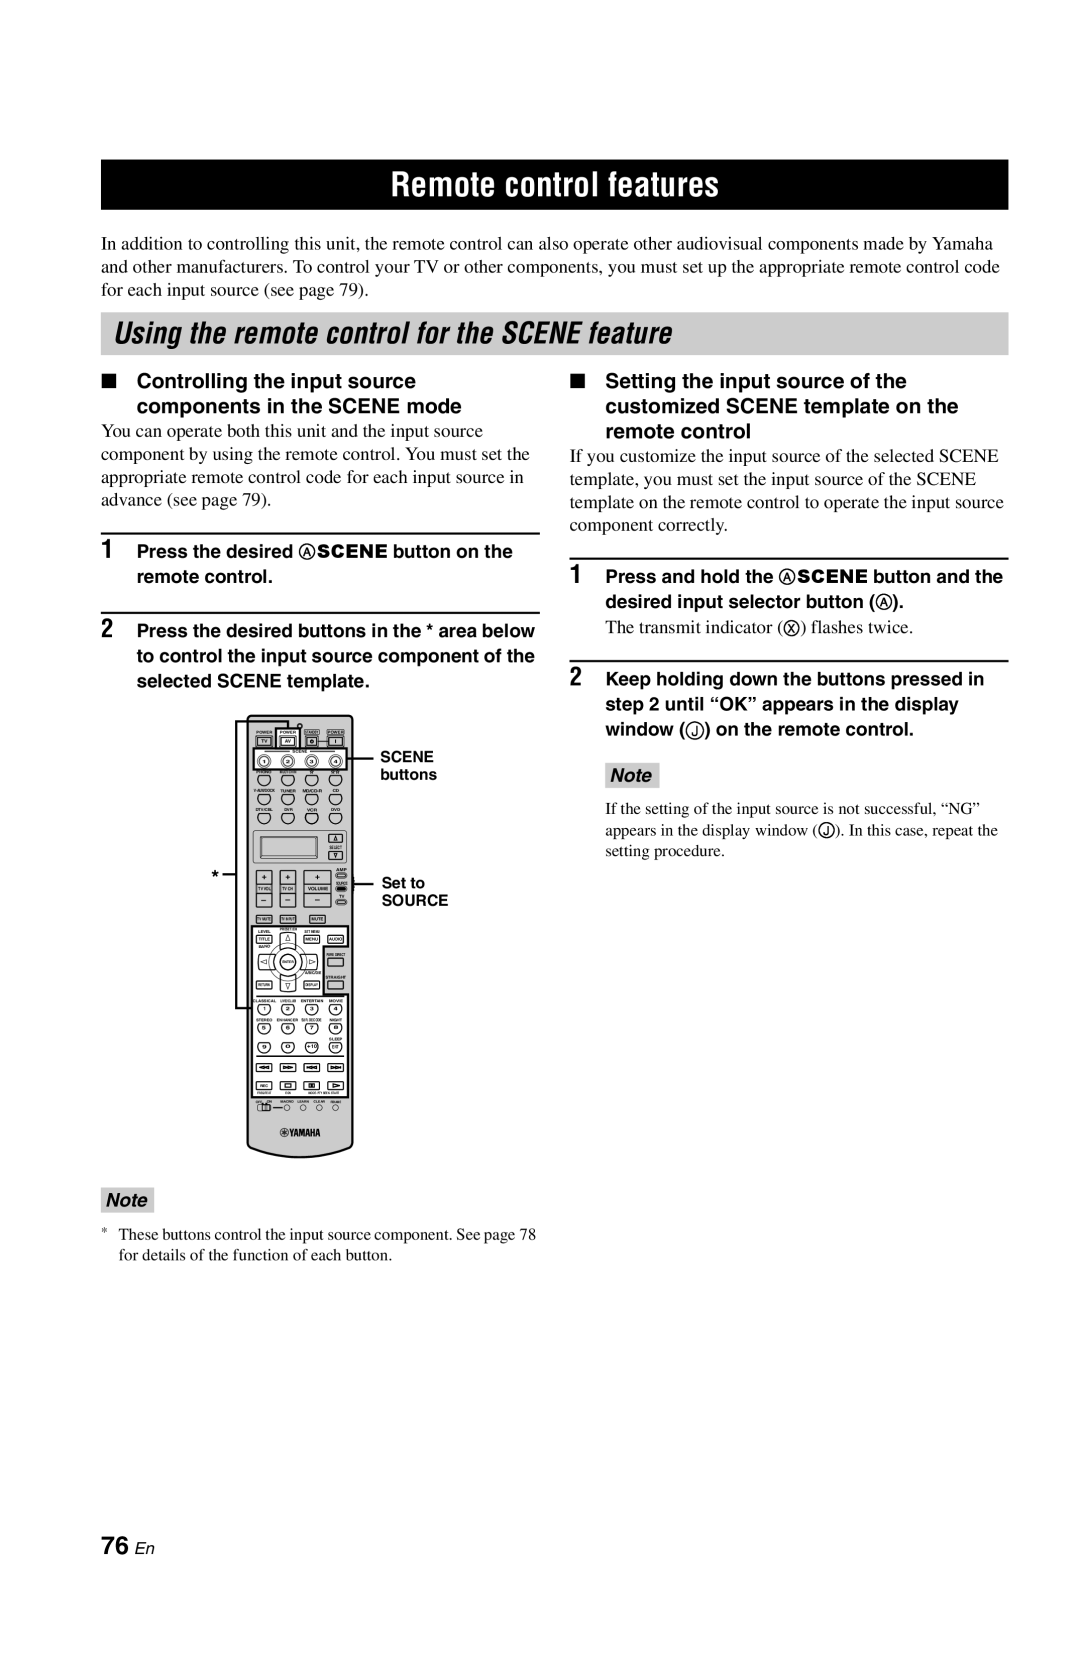 Yamaha DSP-AX861SE owner manual Remote control features, Using the remote control for the SCENE feature, 76 En 